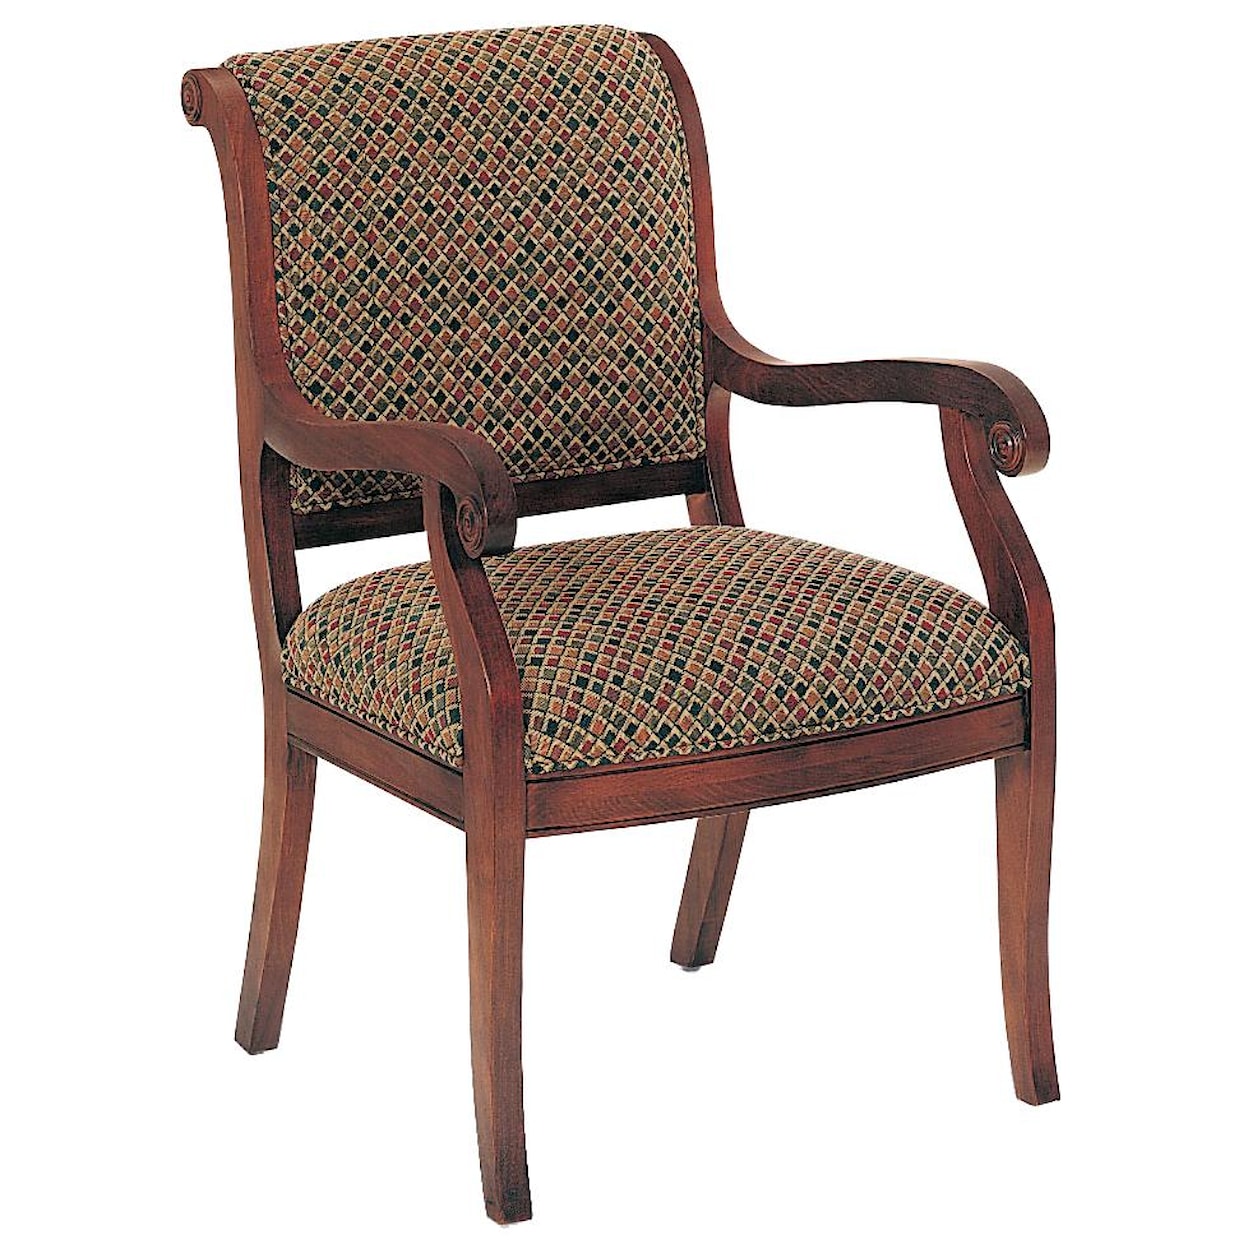 Fairfield Chairs Modest Upholstered Chair